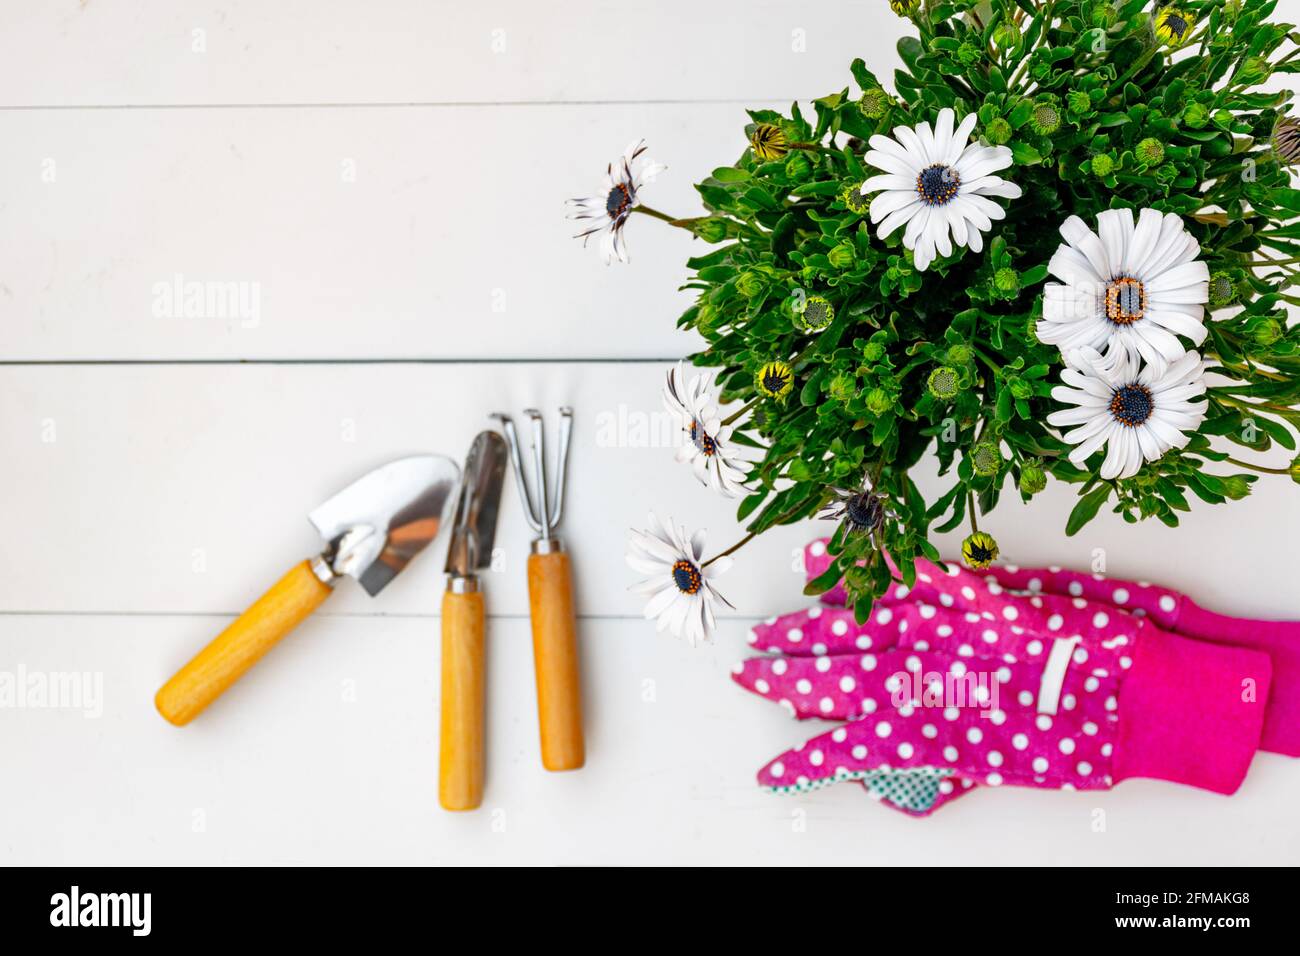 Gardening tools and pink gardening glove and daisy plant on a background of white rustic boards. top view. Stock Photo